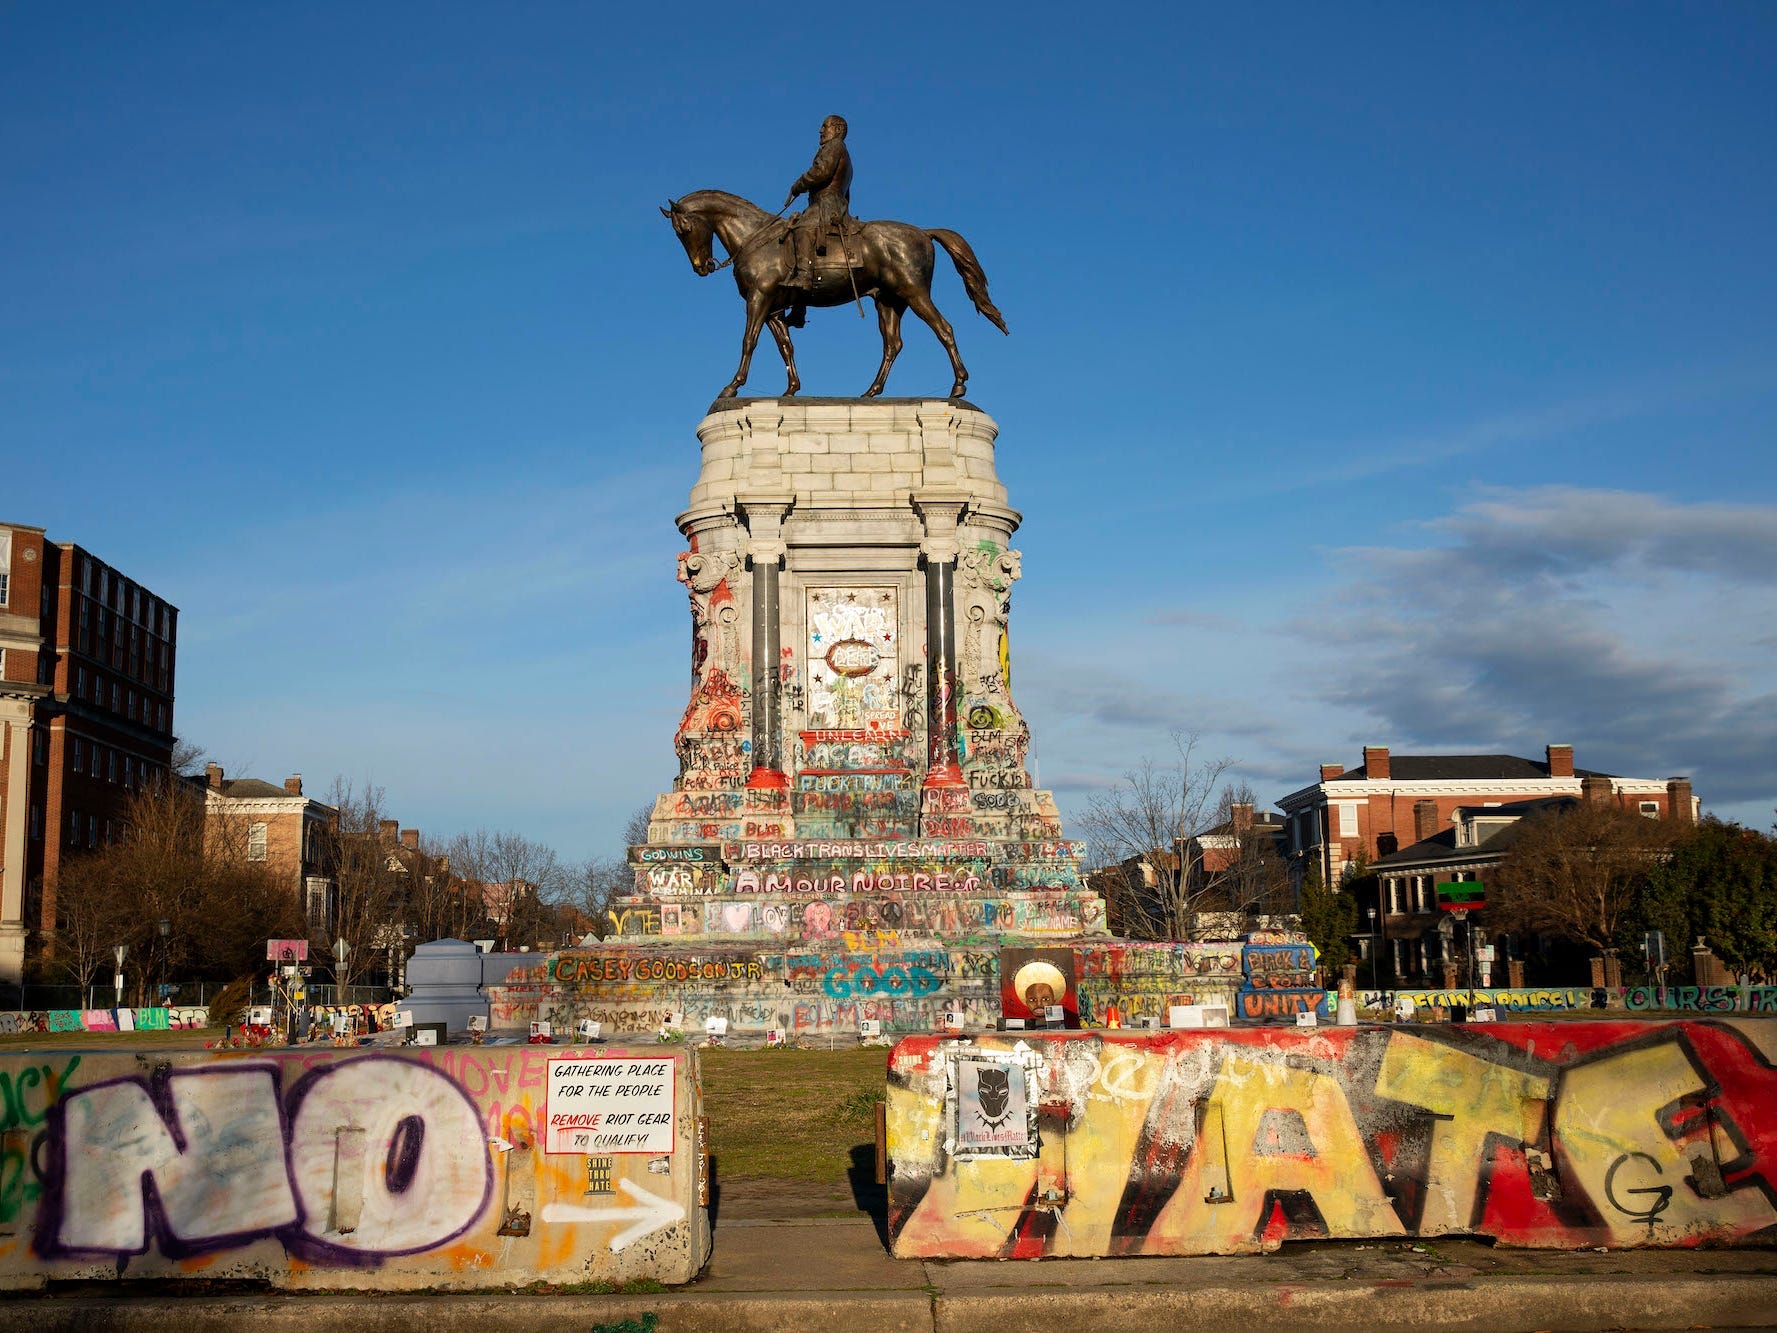 Streets are closed around the Robert E. Lee statue ahead of expected protests in Richmond, Virginia on January 17, 2021.